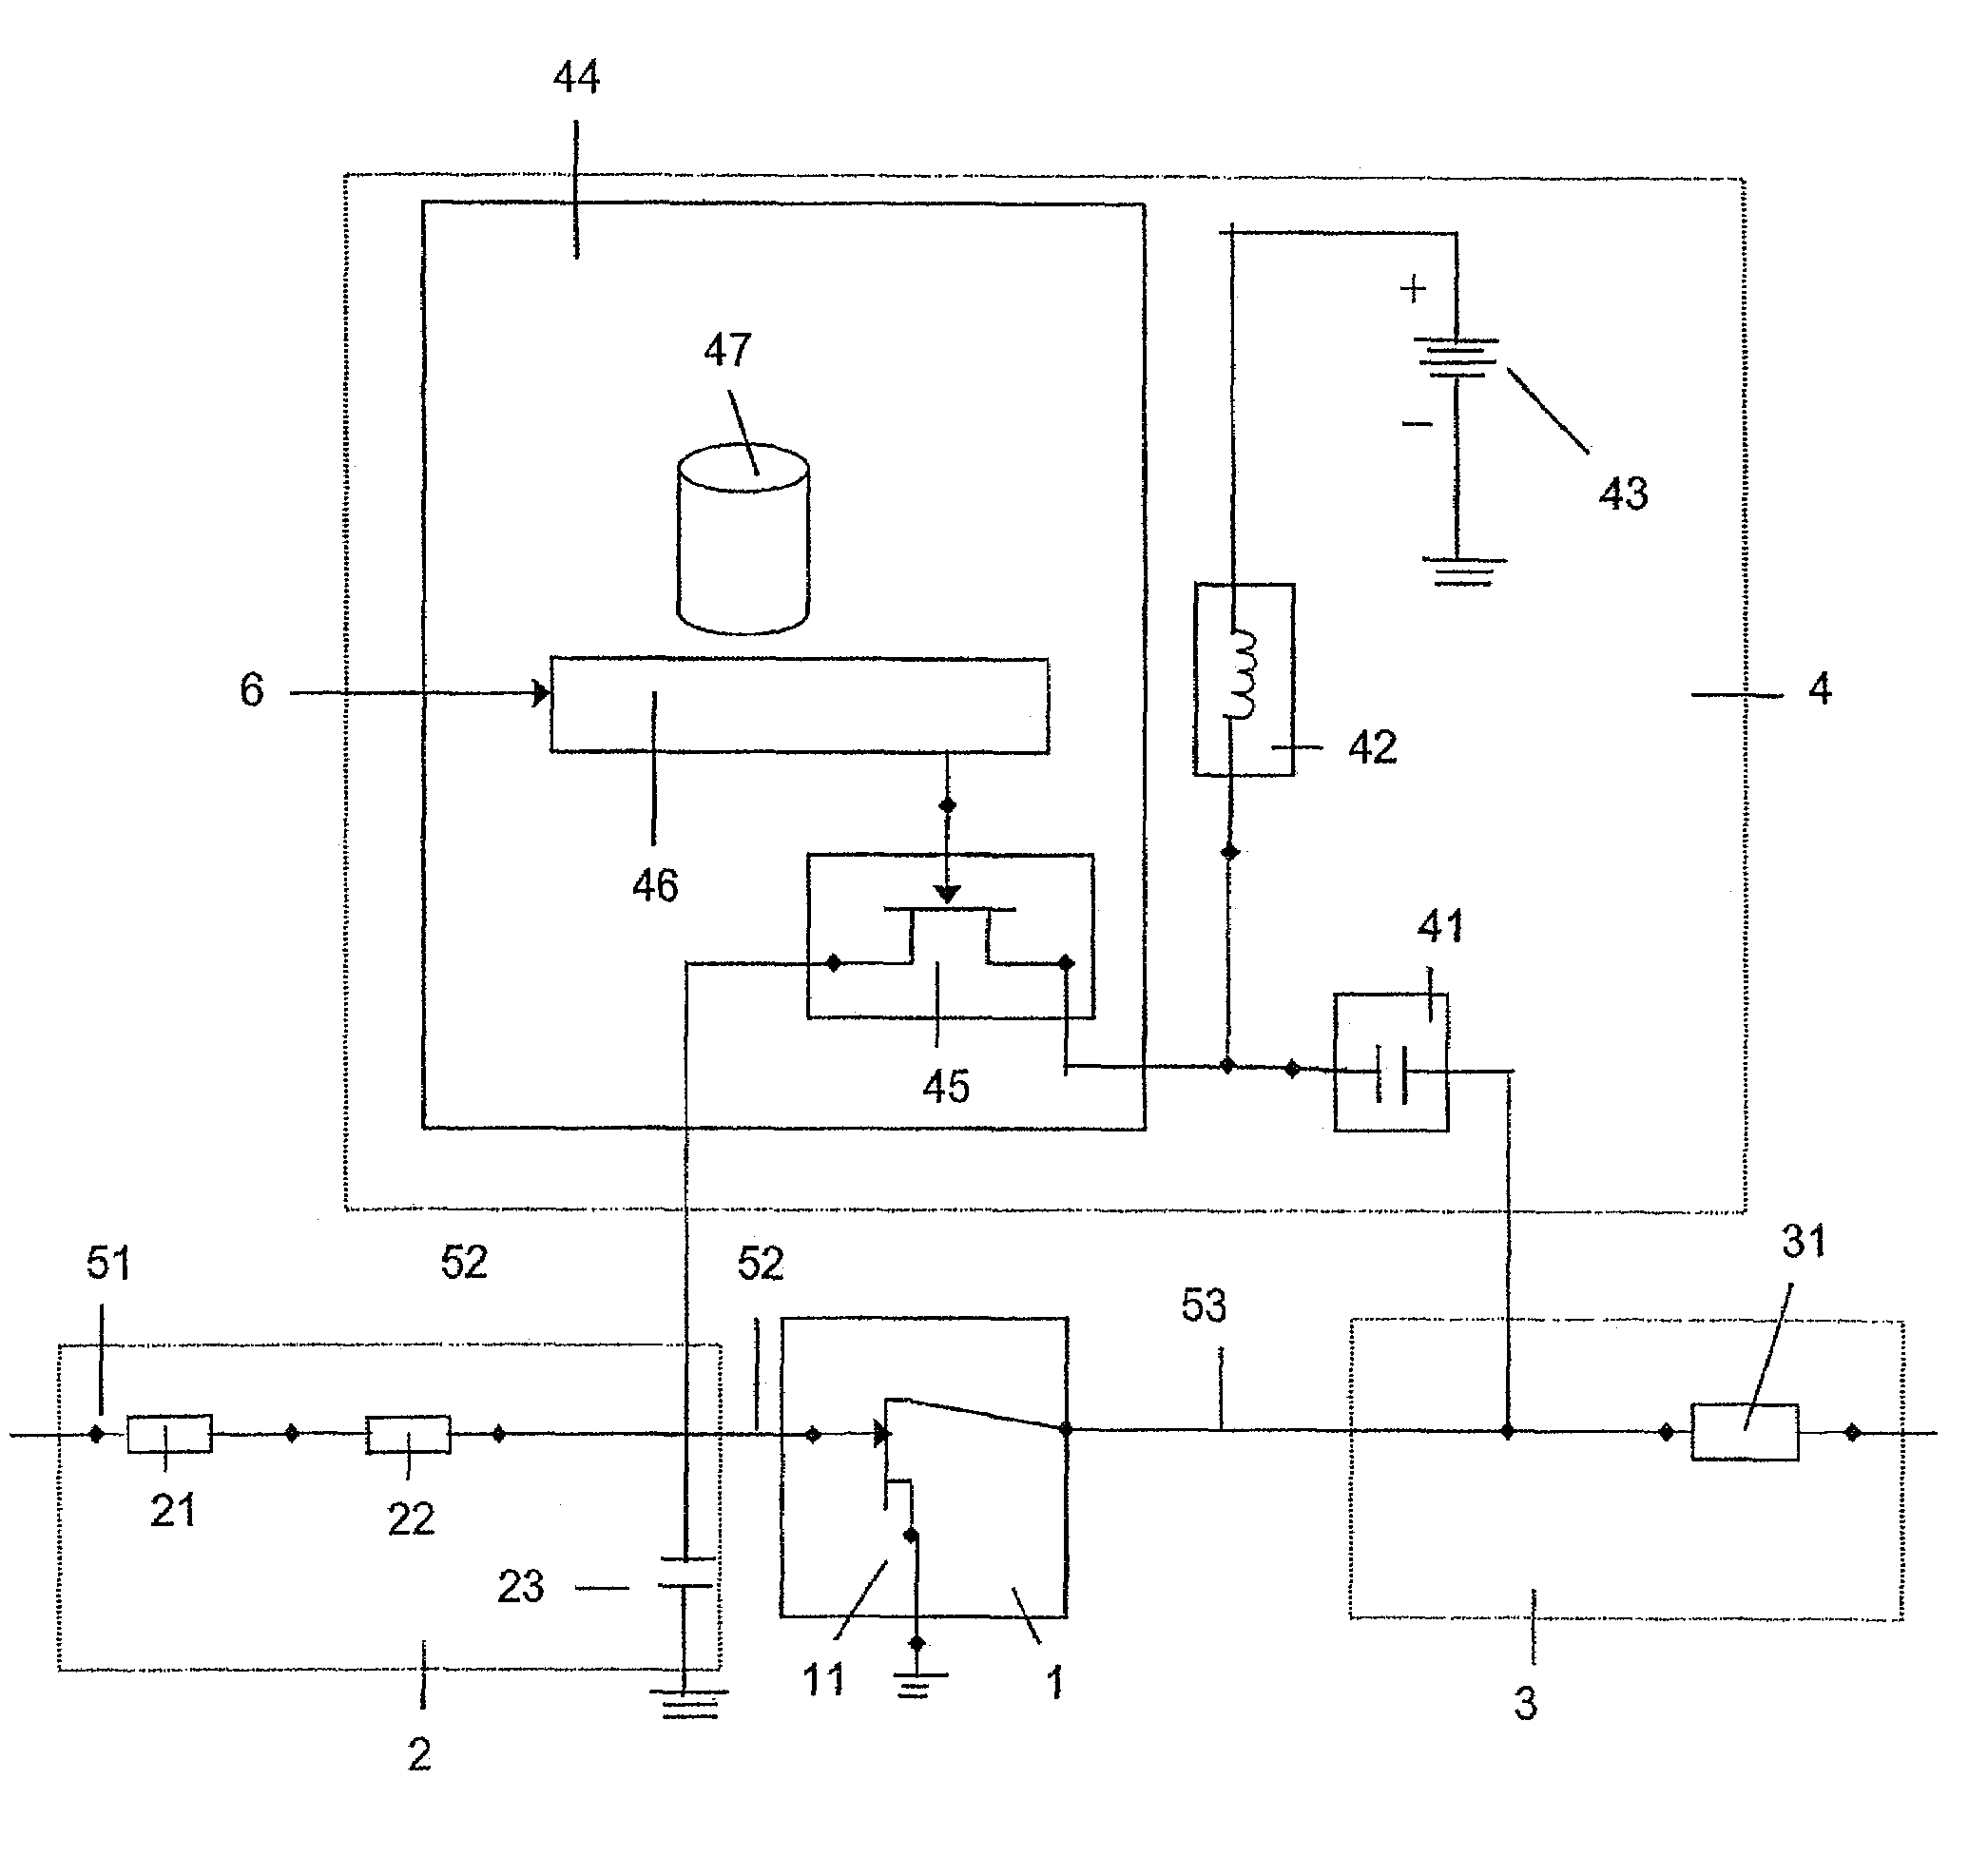 Power amplifier with controllable feedback loop